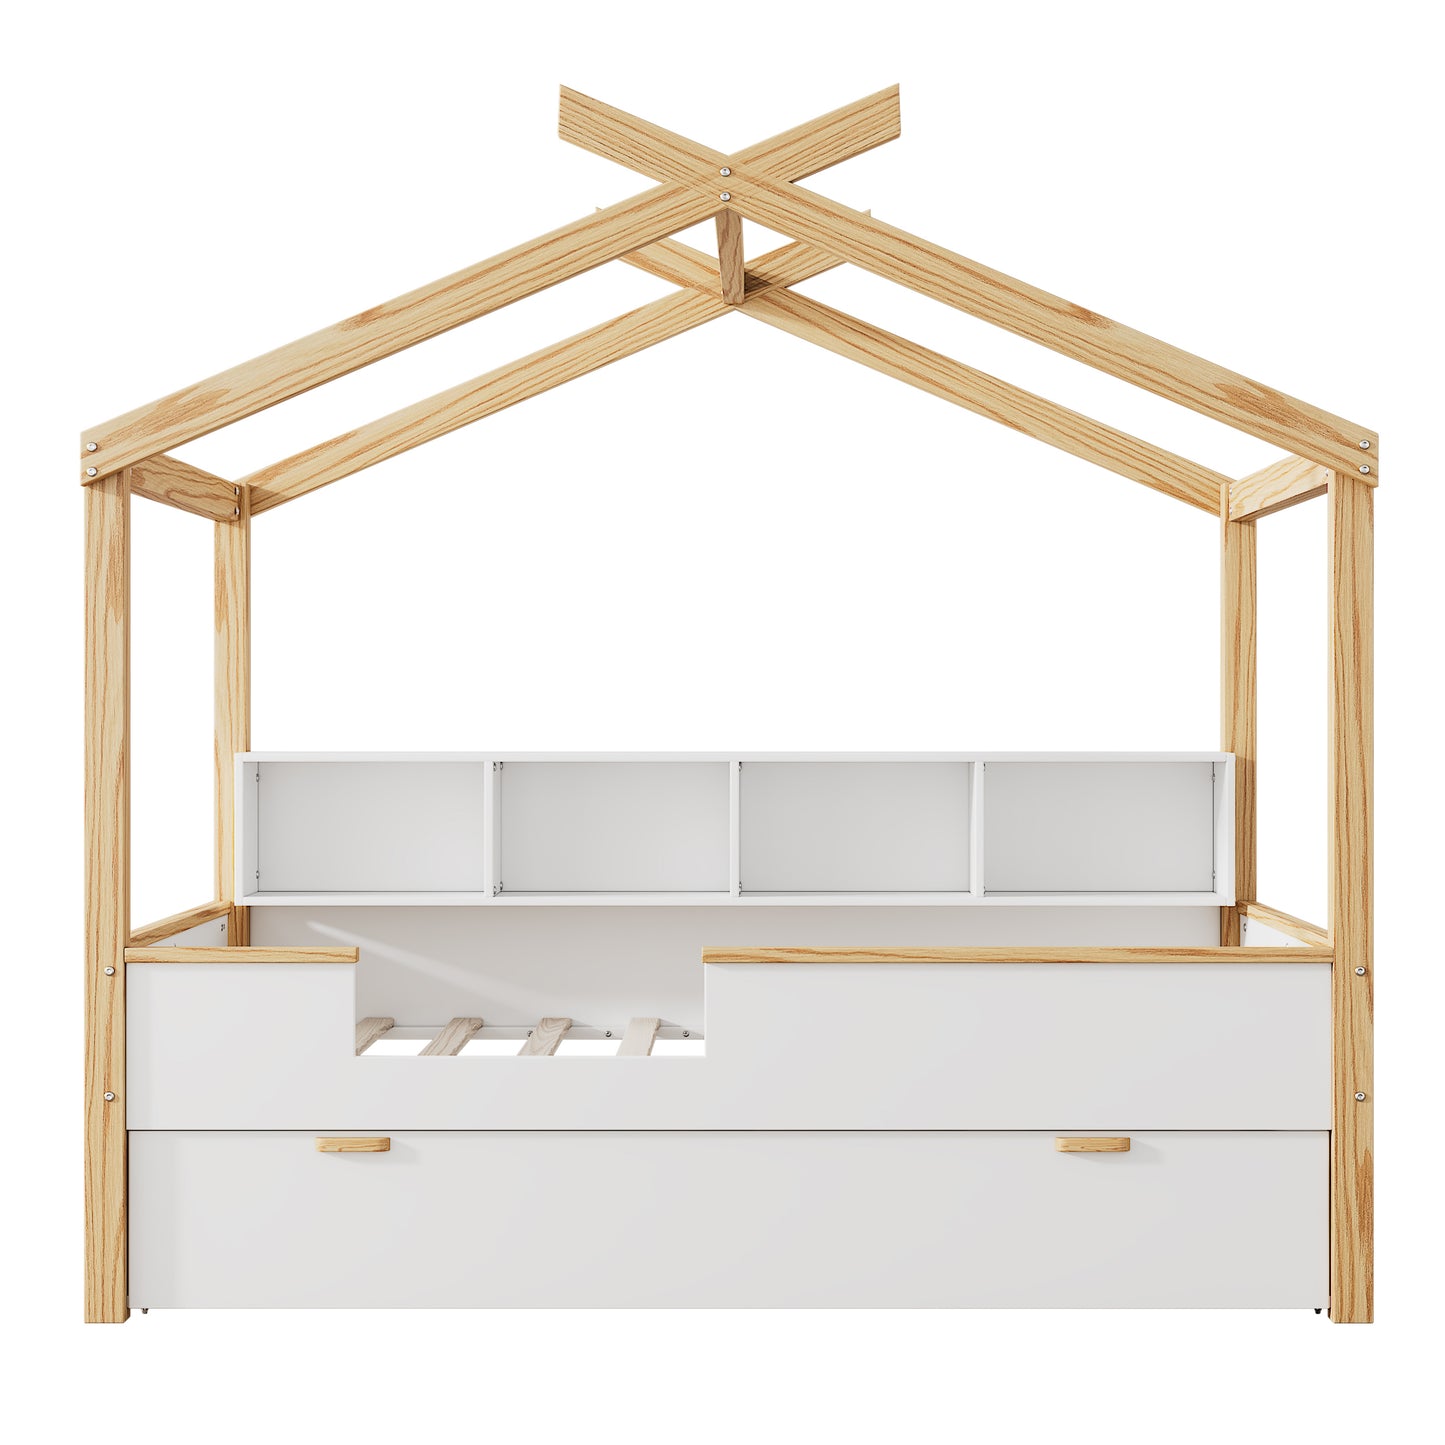 White Full Size Wooden House Platform Bed with Original Wood Colored Frame Twin Size Trundle and Bookshelf Storage Space for Children or Guest Room